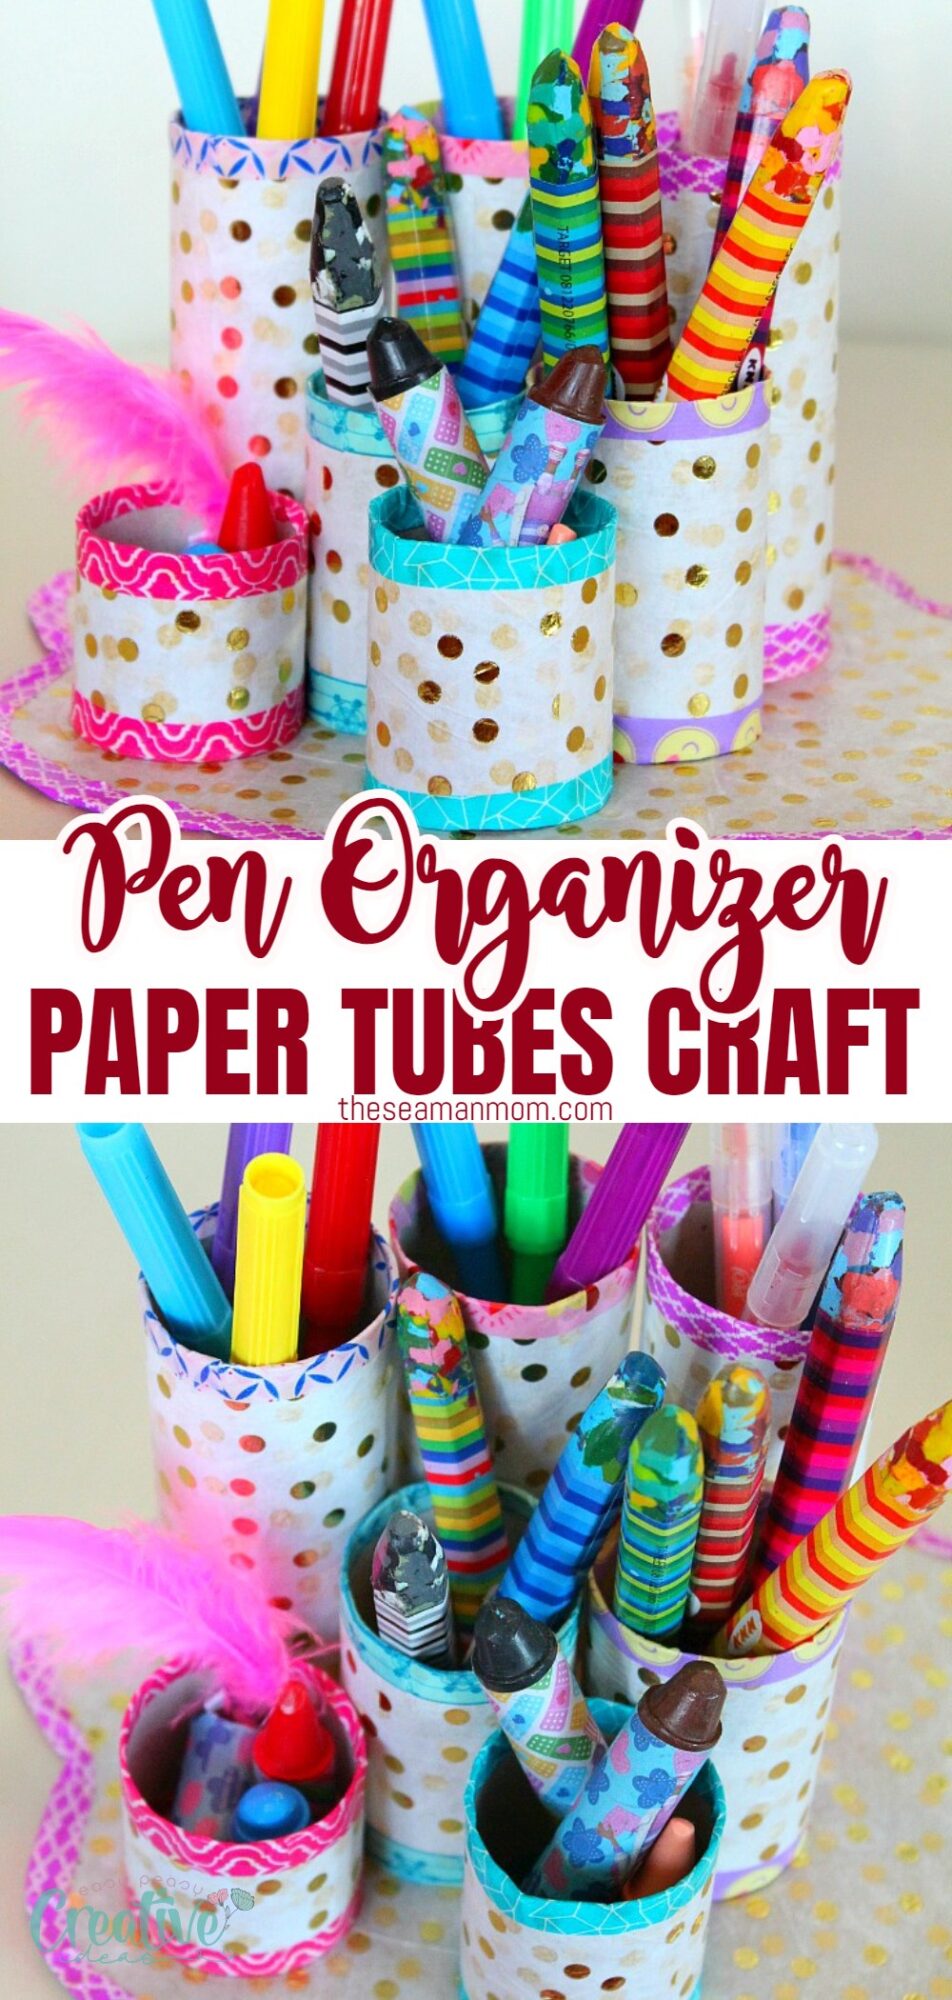 Declutter and organize your stationery supplies creatively with a DIY pen organizer from toilet paper rolls. 